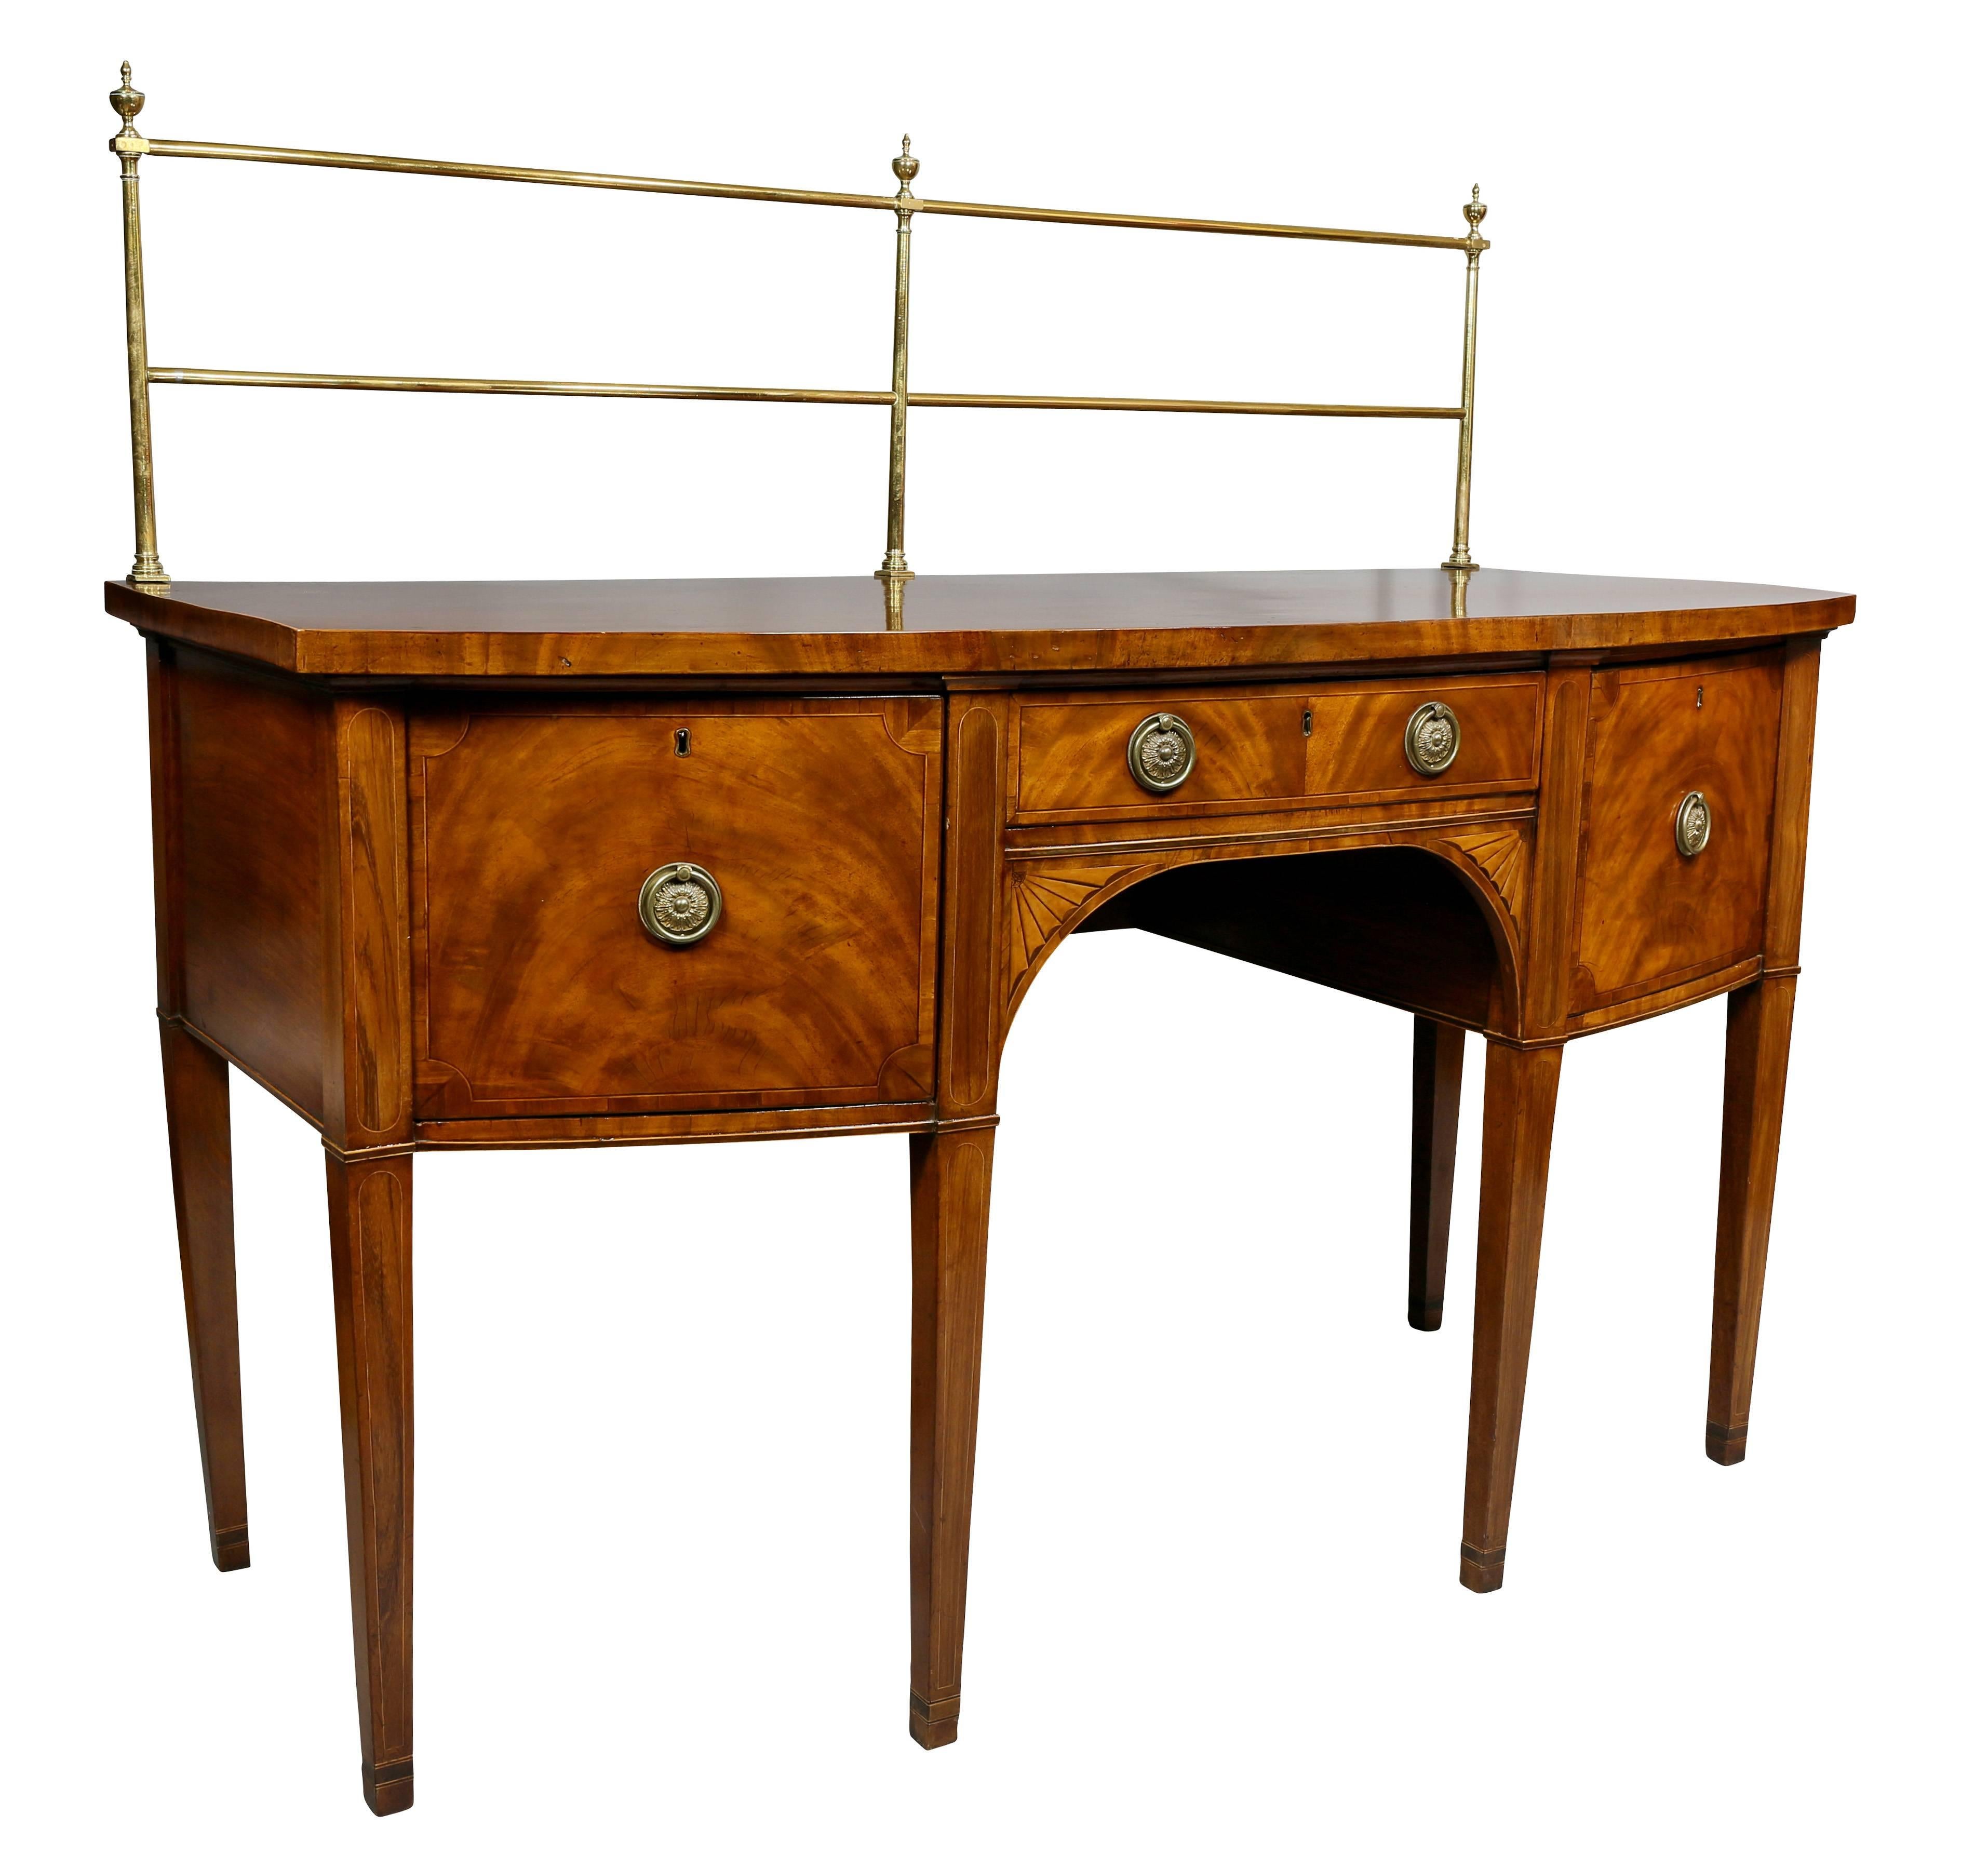 Sideboard with removable brass curtain rail over a bowed top with crossbanded edge, central drawer over fan inlaid spandrels flanked by two deep drawers, raised on square tapered legs.